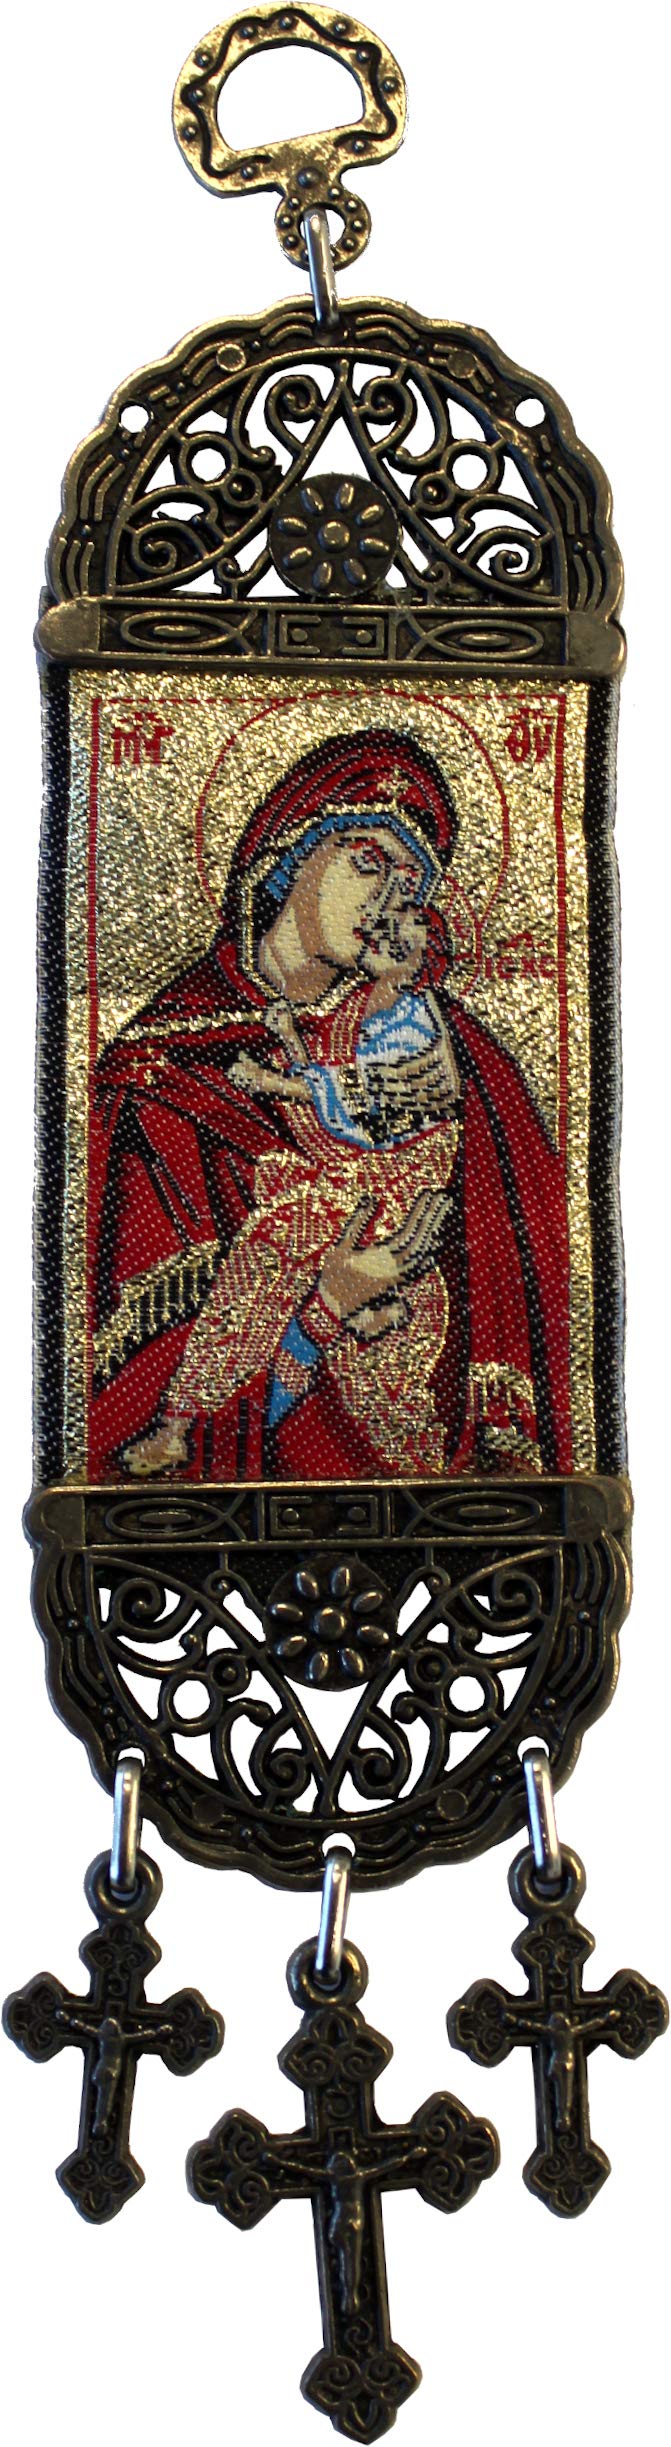 Holy Land Market Wall Hanging Tapestry of The Blessed Mother Mary - with Heat Printing on Synthetic Cloth Decorated - Style IV (8 x 2 Inches)